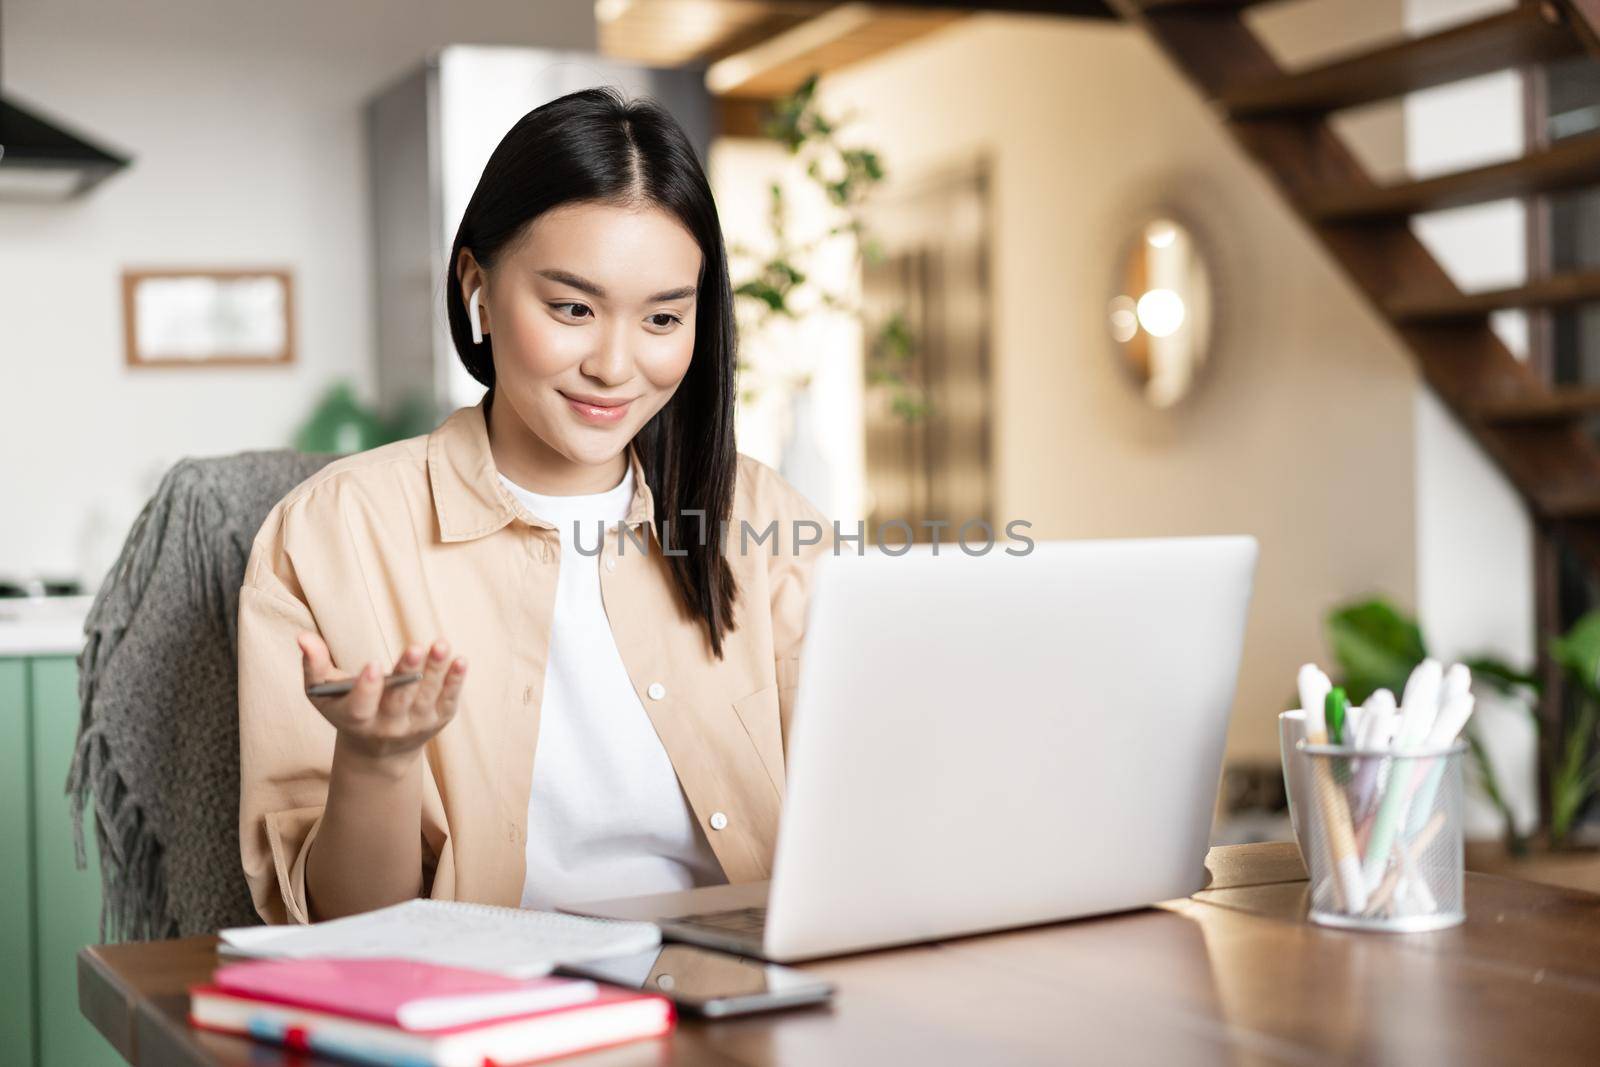 Asian girl talks on video chat with laptop, smiling and having conversation using online computer application.